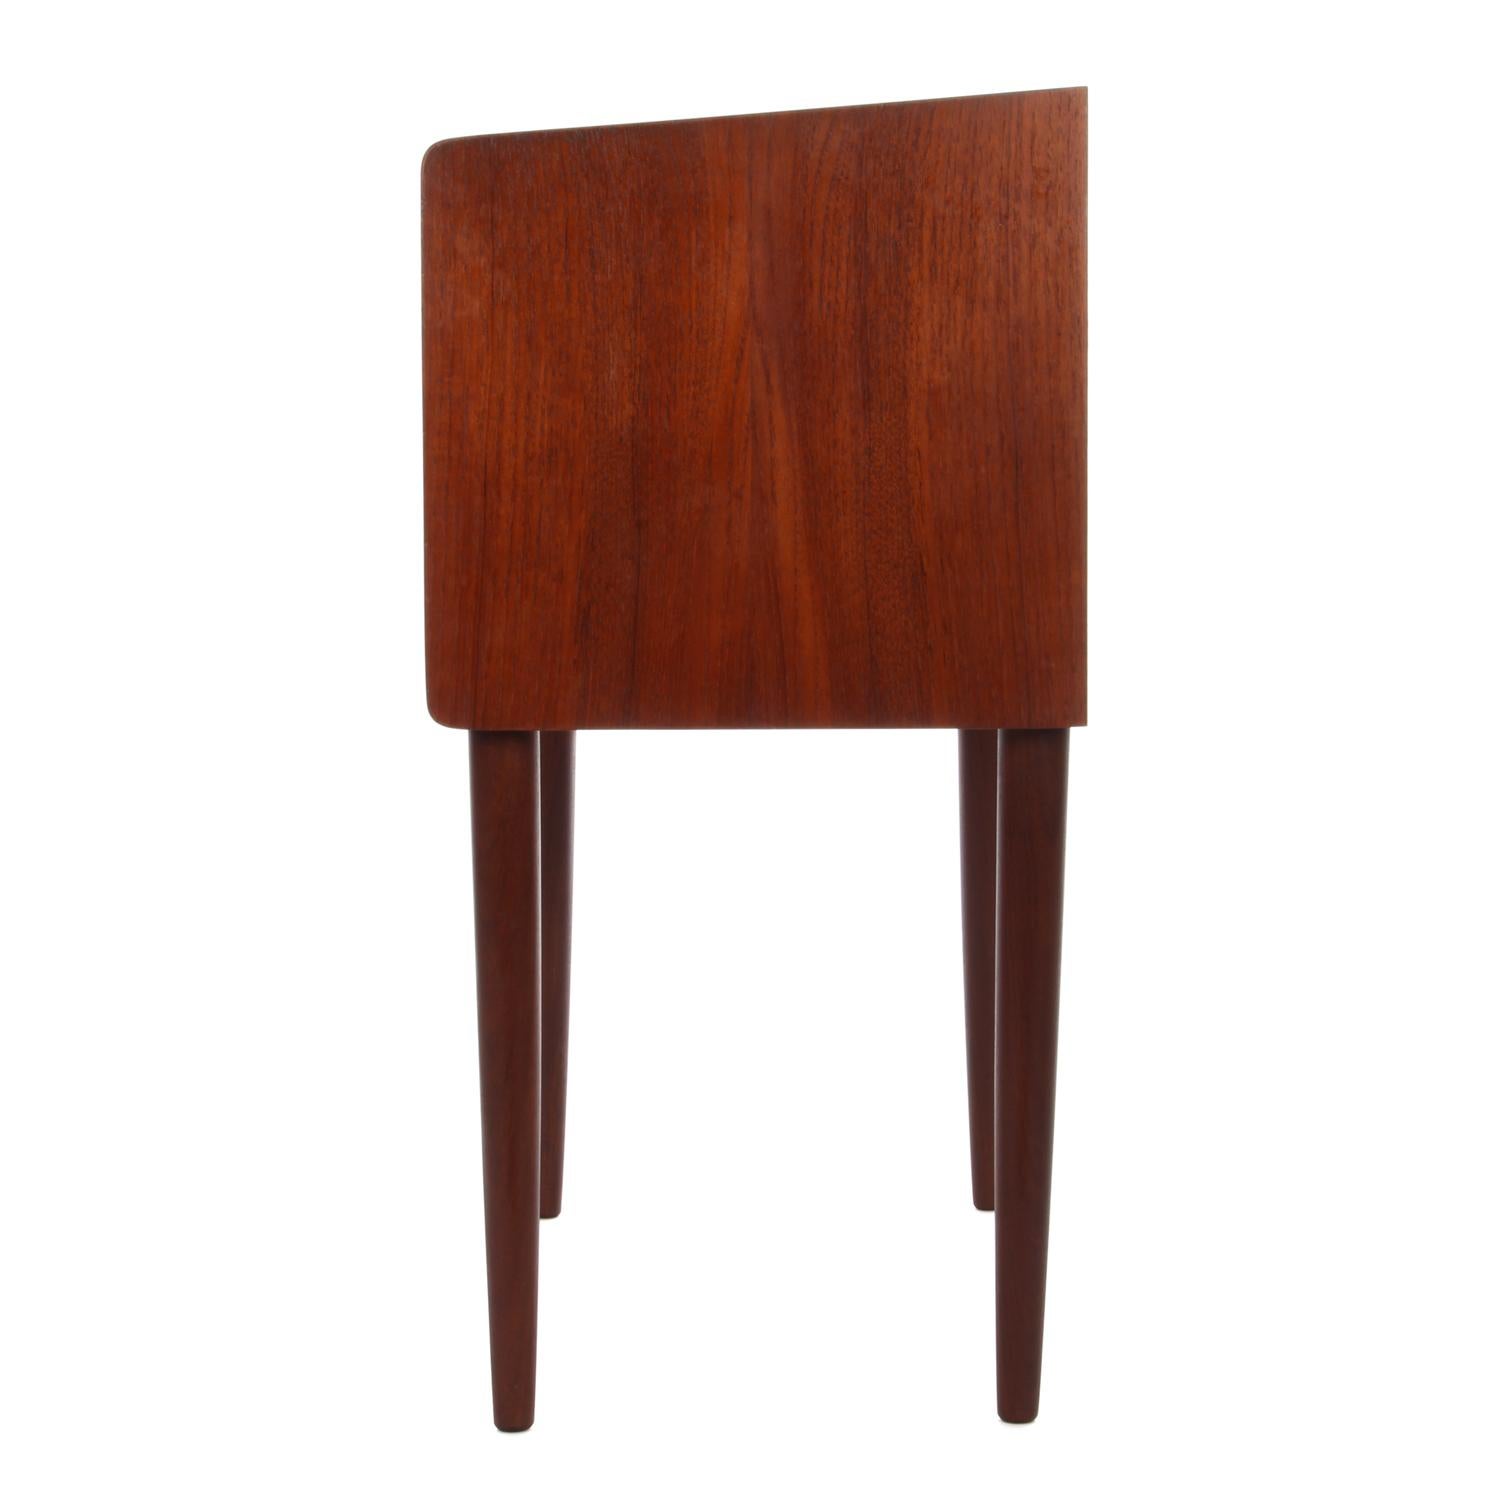 Veneer Rosewood Dresser, 1960s Danish Midcentury Chest with Drawers or Entry Table